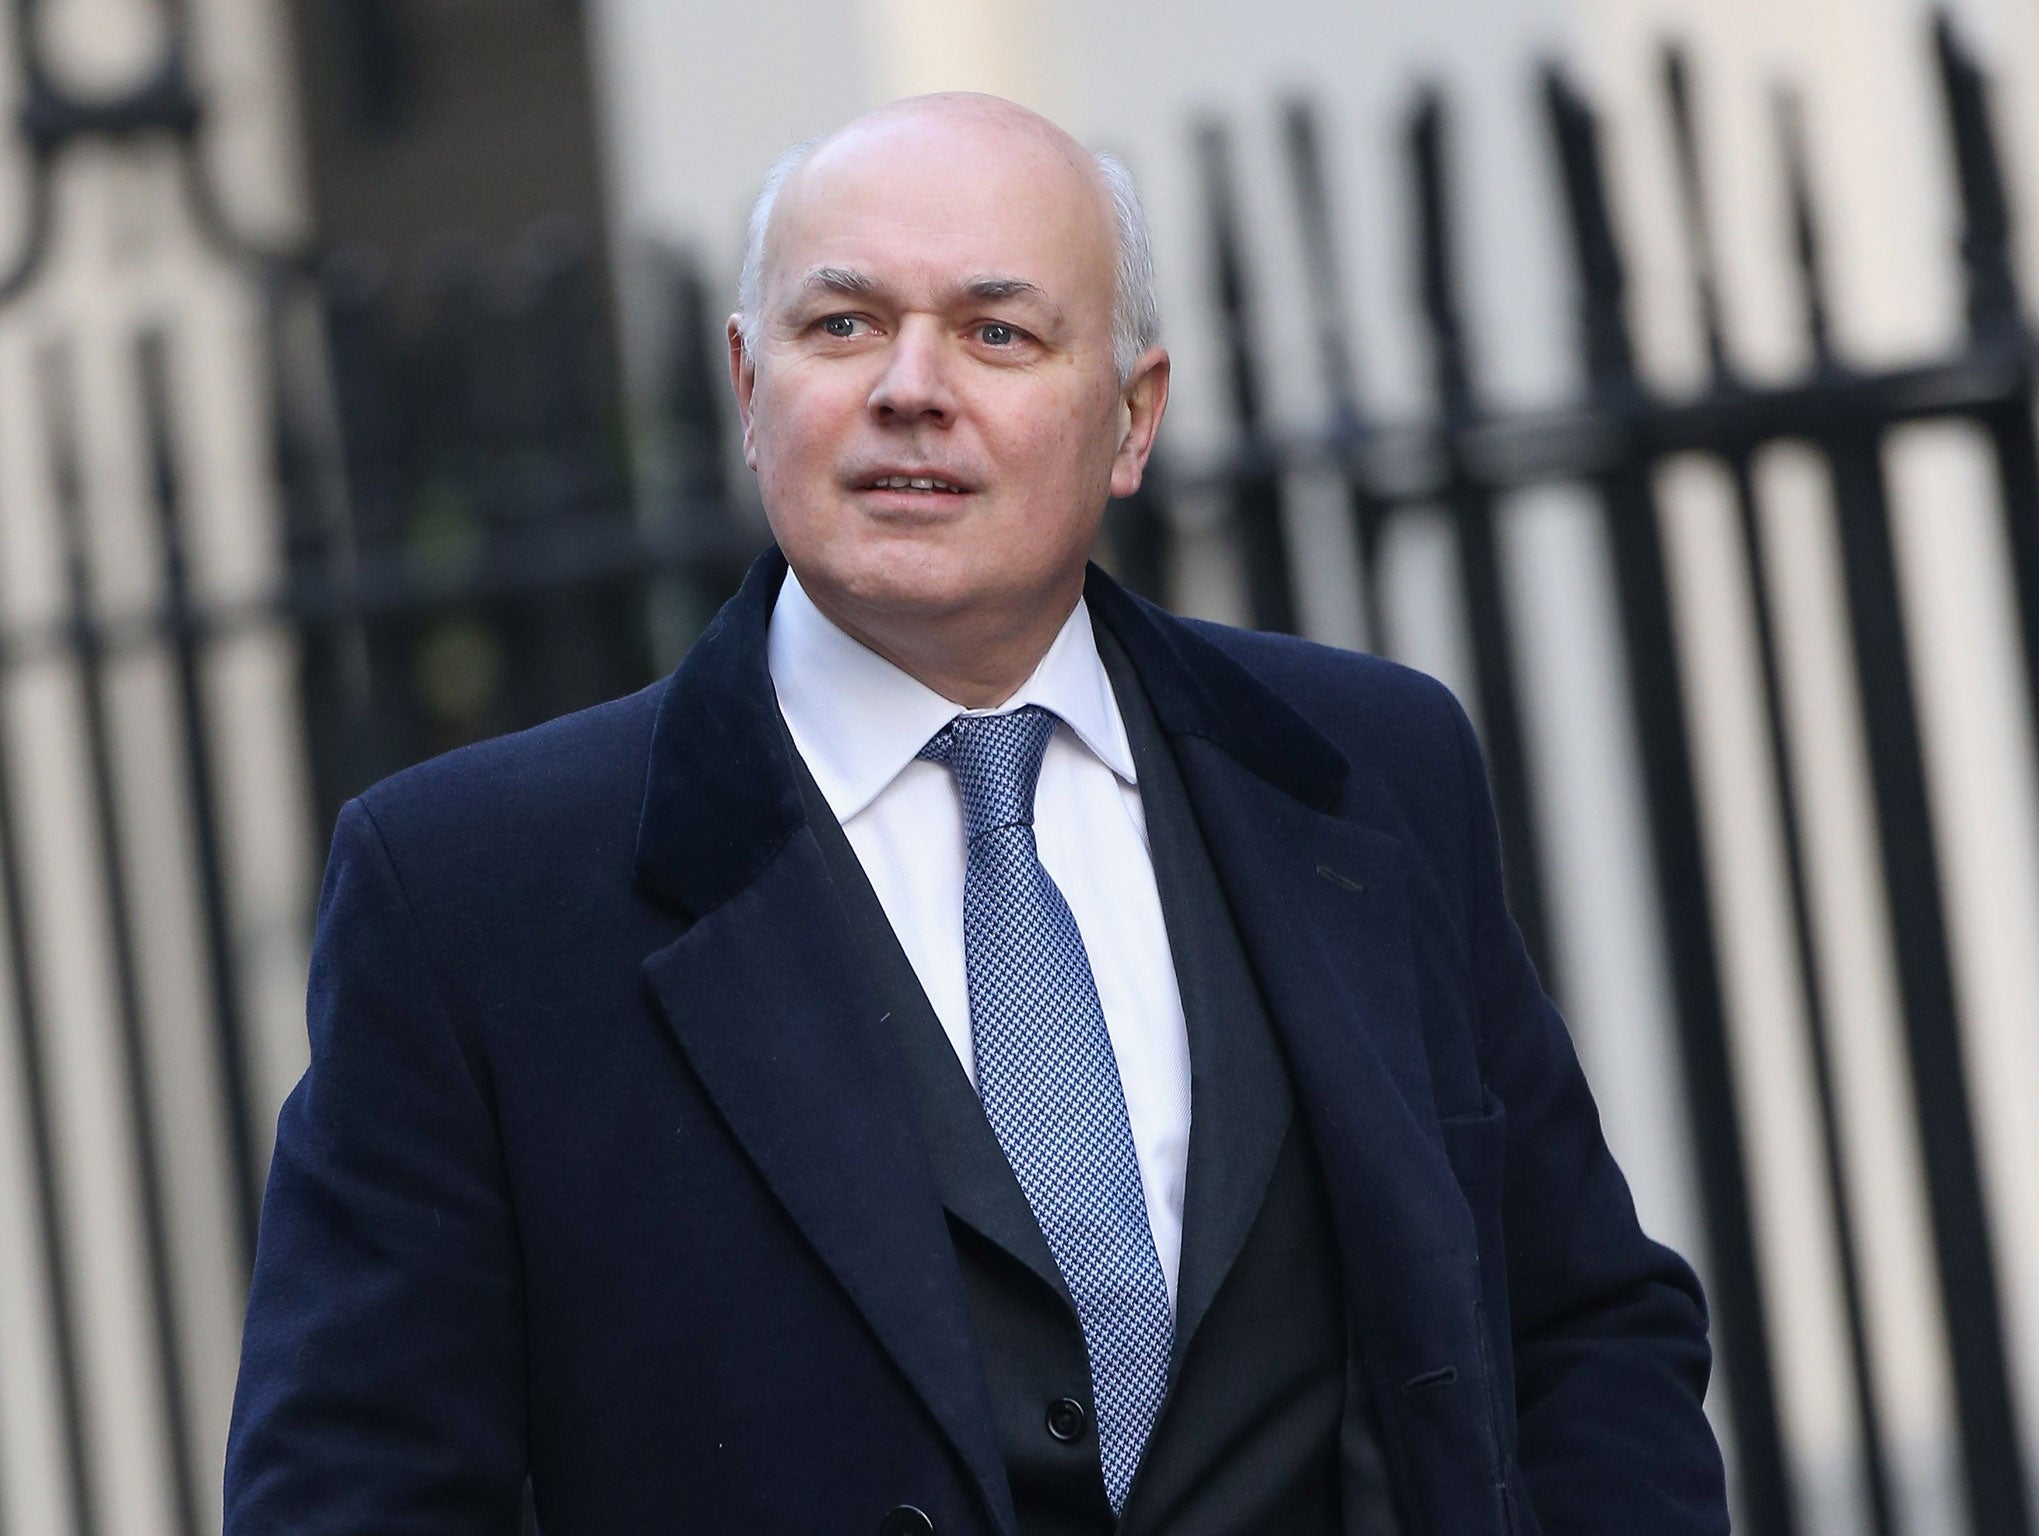 Iain Duncan Smith blamed civil servants for not giving him the full picture of teething problems of universal credit